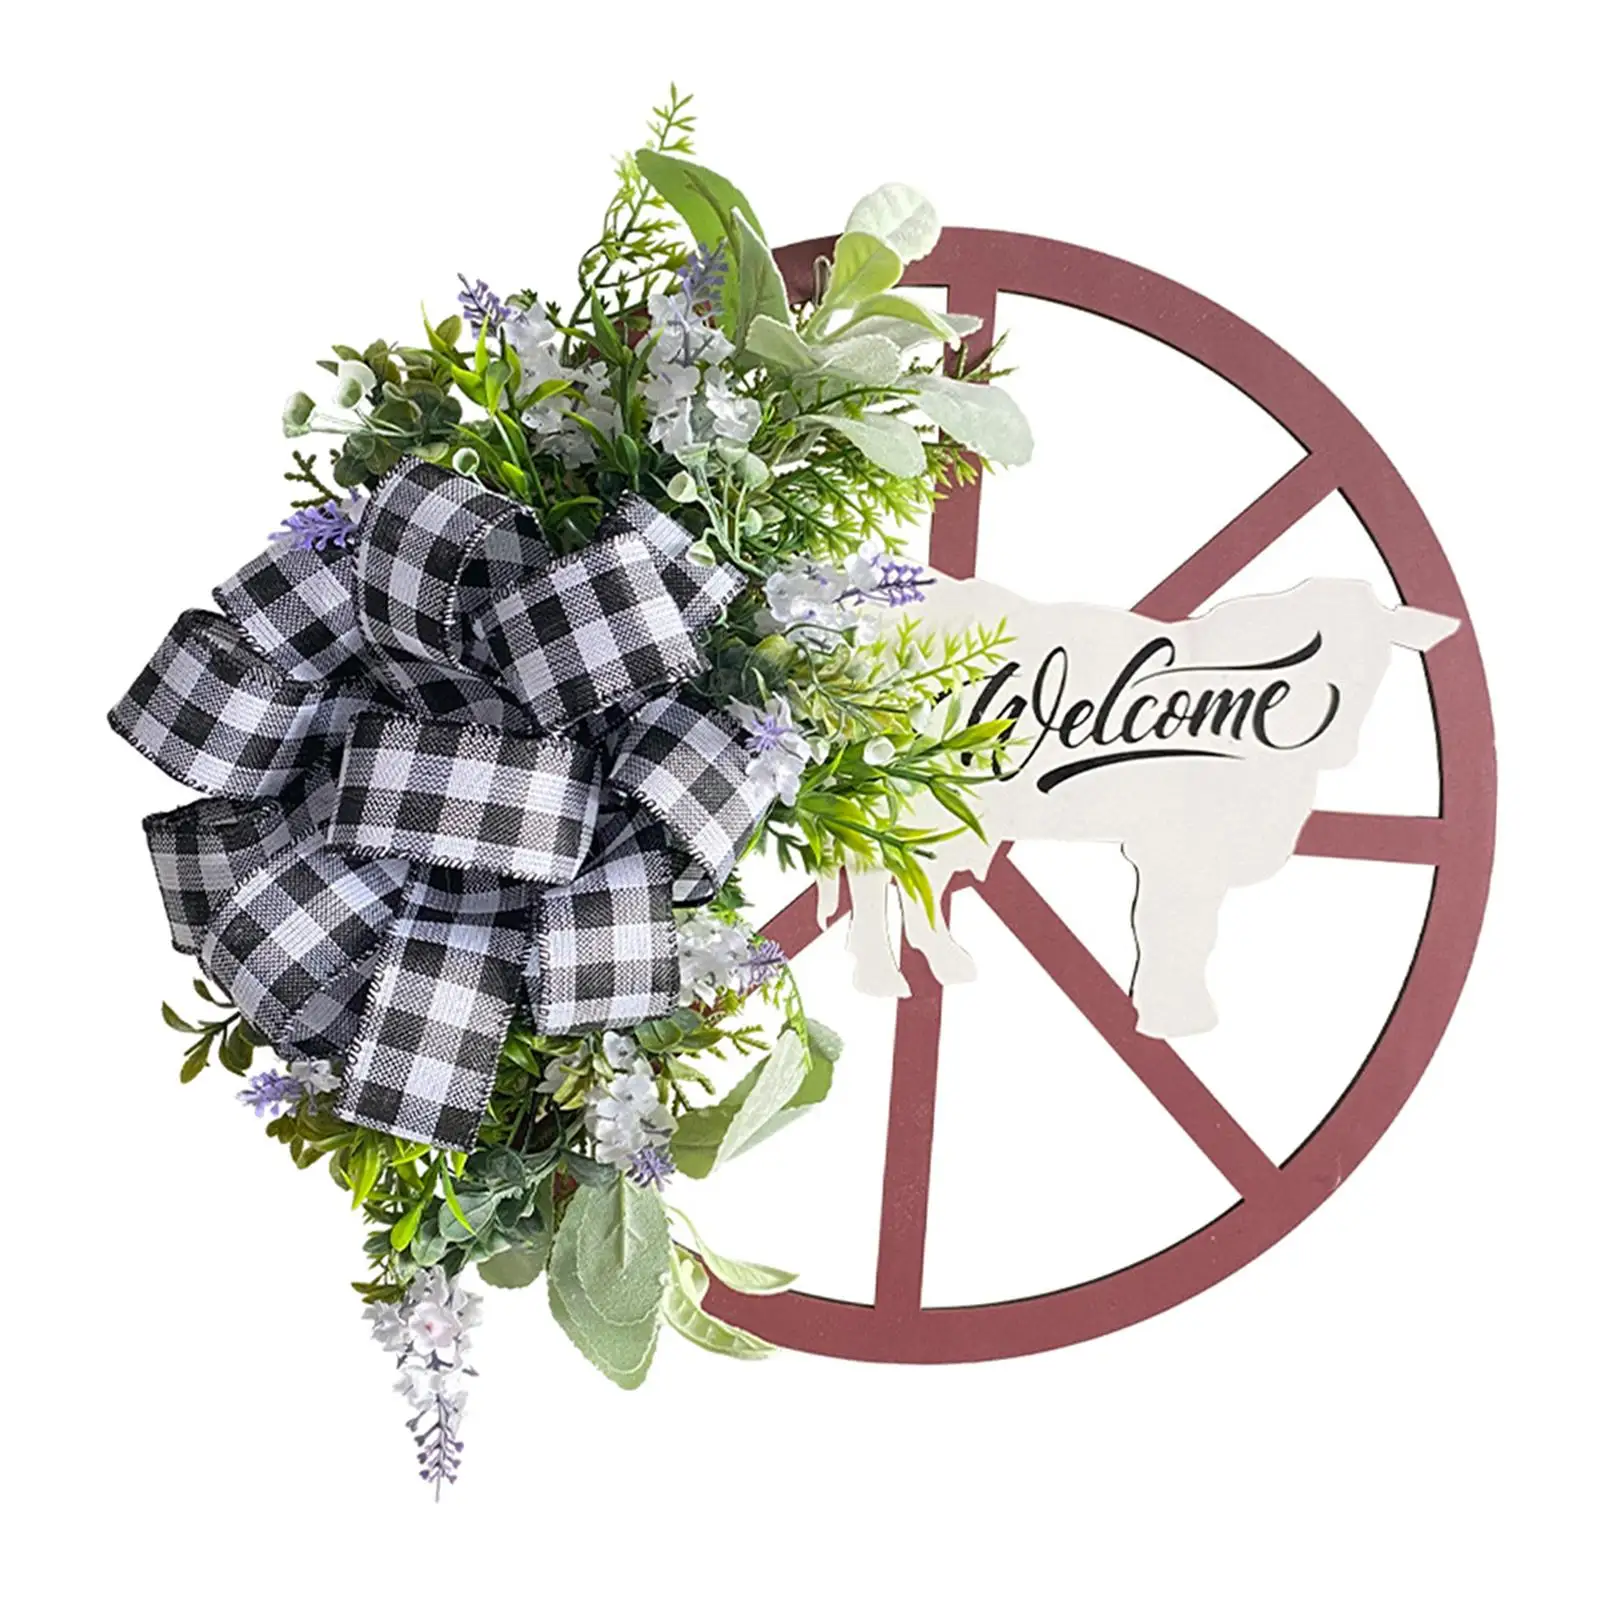 Wagon Wheel Wreath Hanging Decor Black White Plaid Bow Artificial Flower Wreath for Wall Fireplace Party Decor Holiday Home